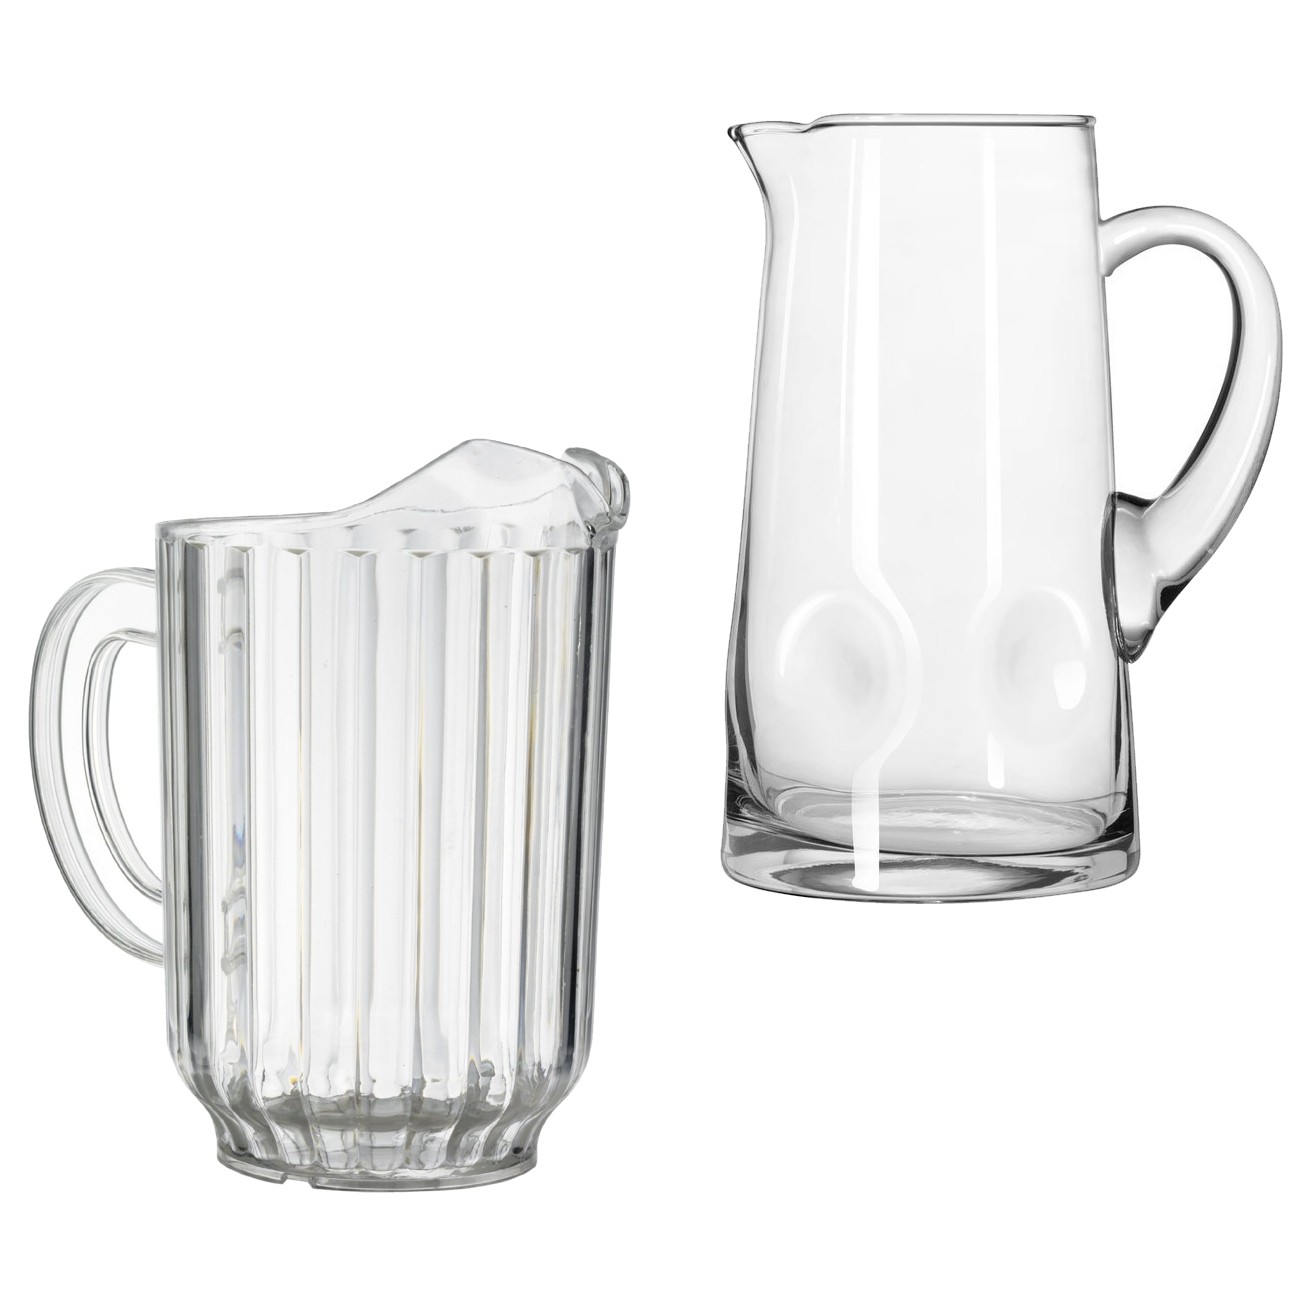 http://www.usapartyrental.co/483/serving-pitchers-for-sale.jpg